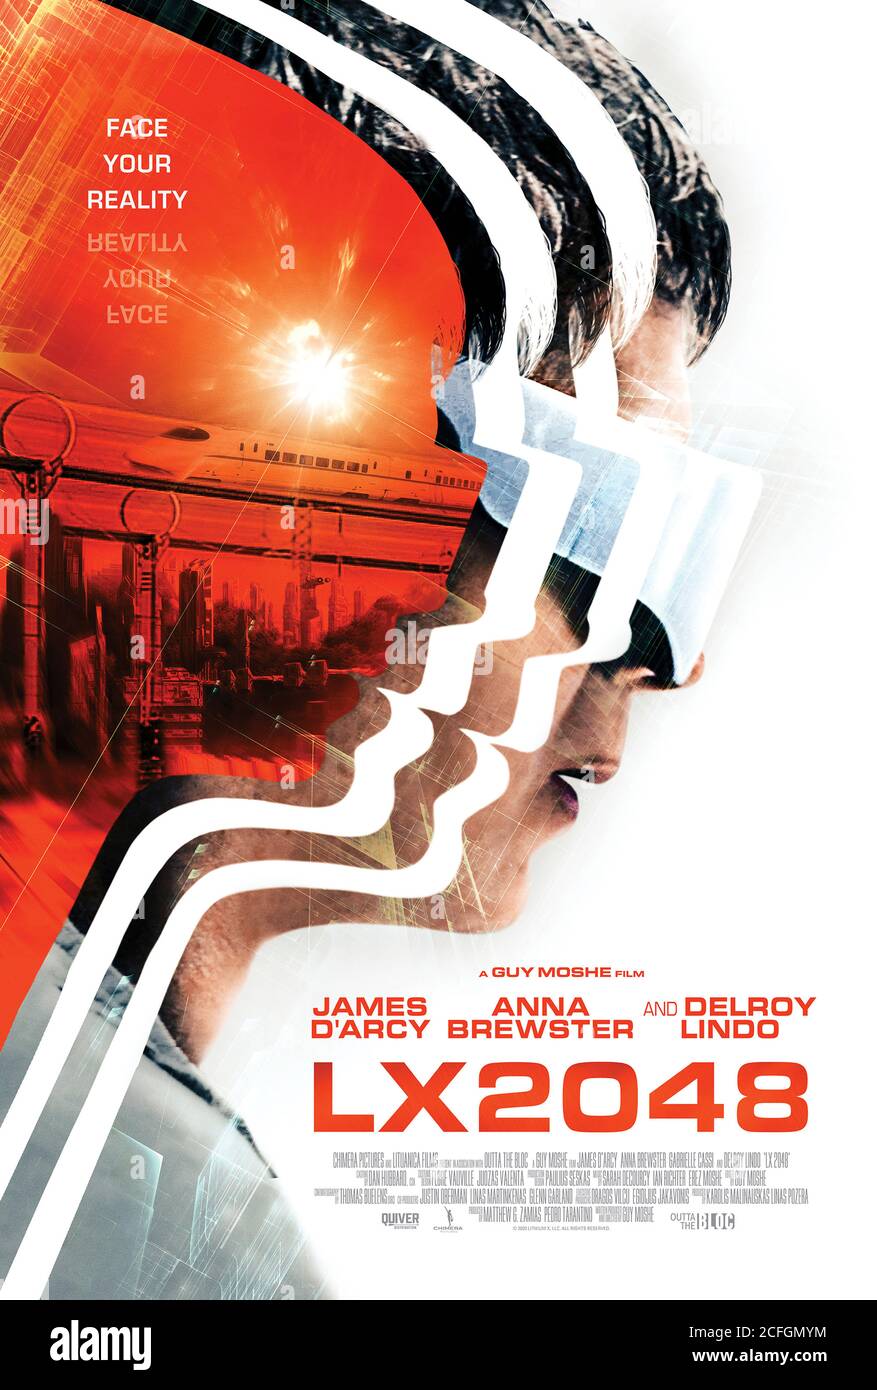 LX 2048 (2020) directed by Guy Moshe and starring James D'Arcy, Gina McKee, Delroy Lindo and Anna Brewster. In a dystopian future where environmental catastrophy means people can't go outside, Adam Bird discovery he is terminally ill and to be replaced by an upgraded clone. Stock Photo